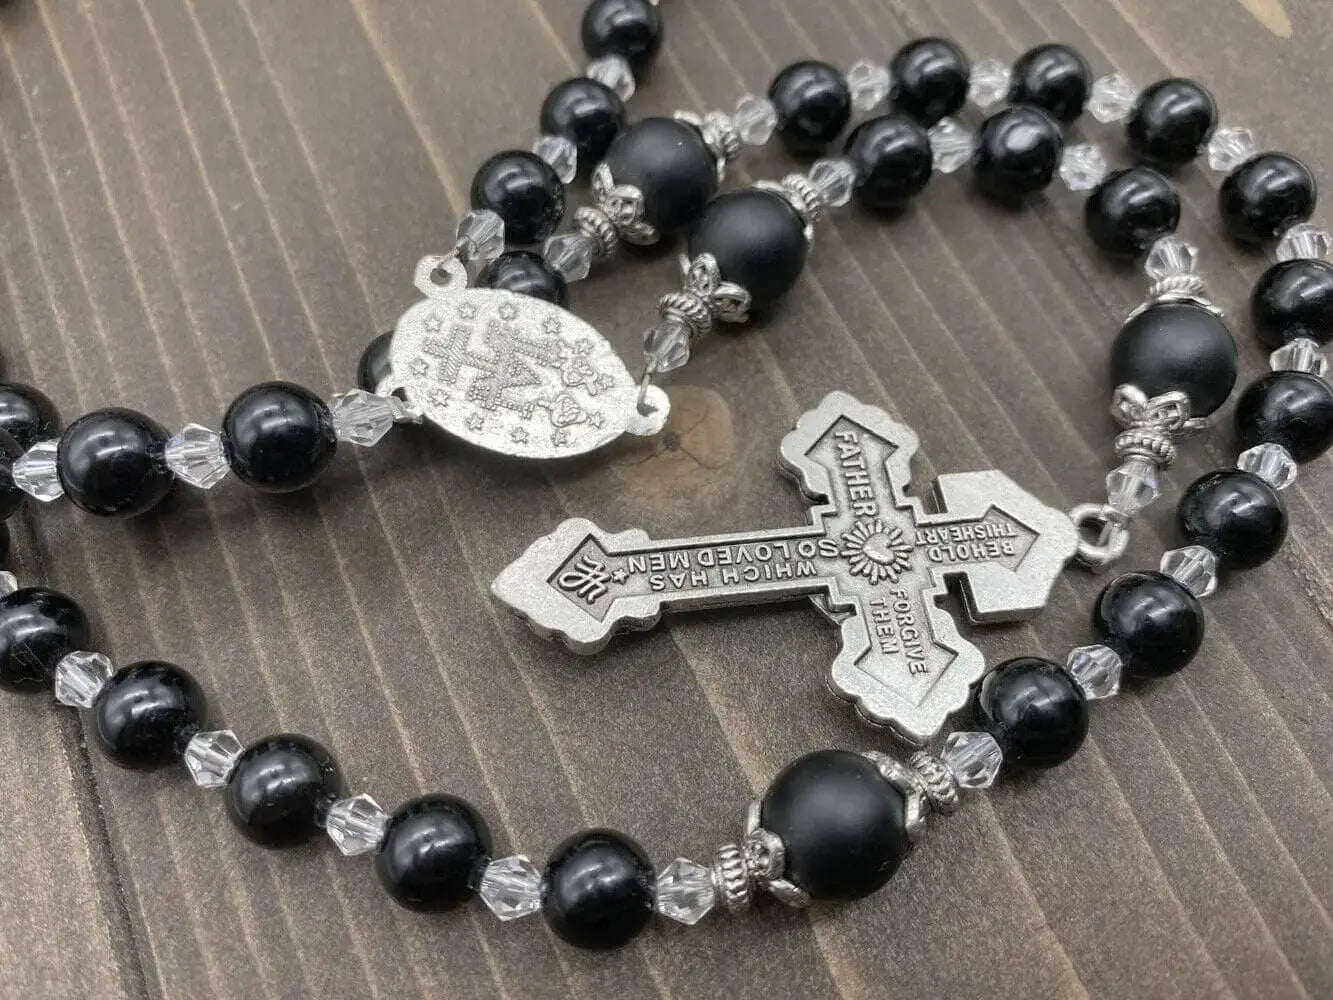 Agate Stone Beads Rosary Necklace Glory Be Stones Miraculous Medal 